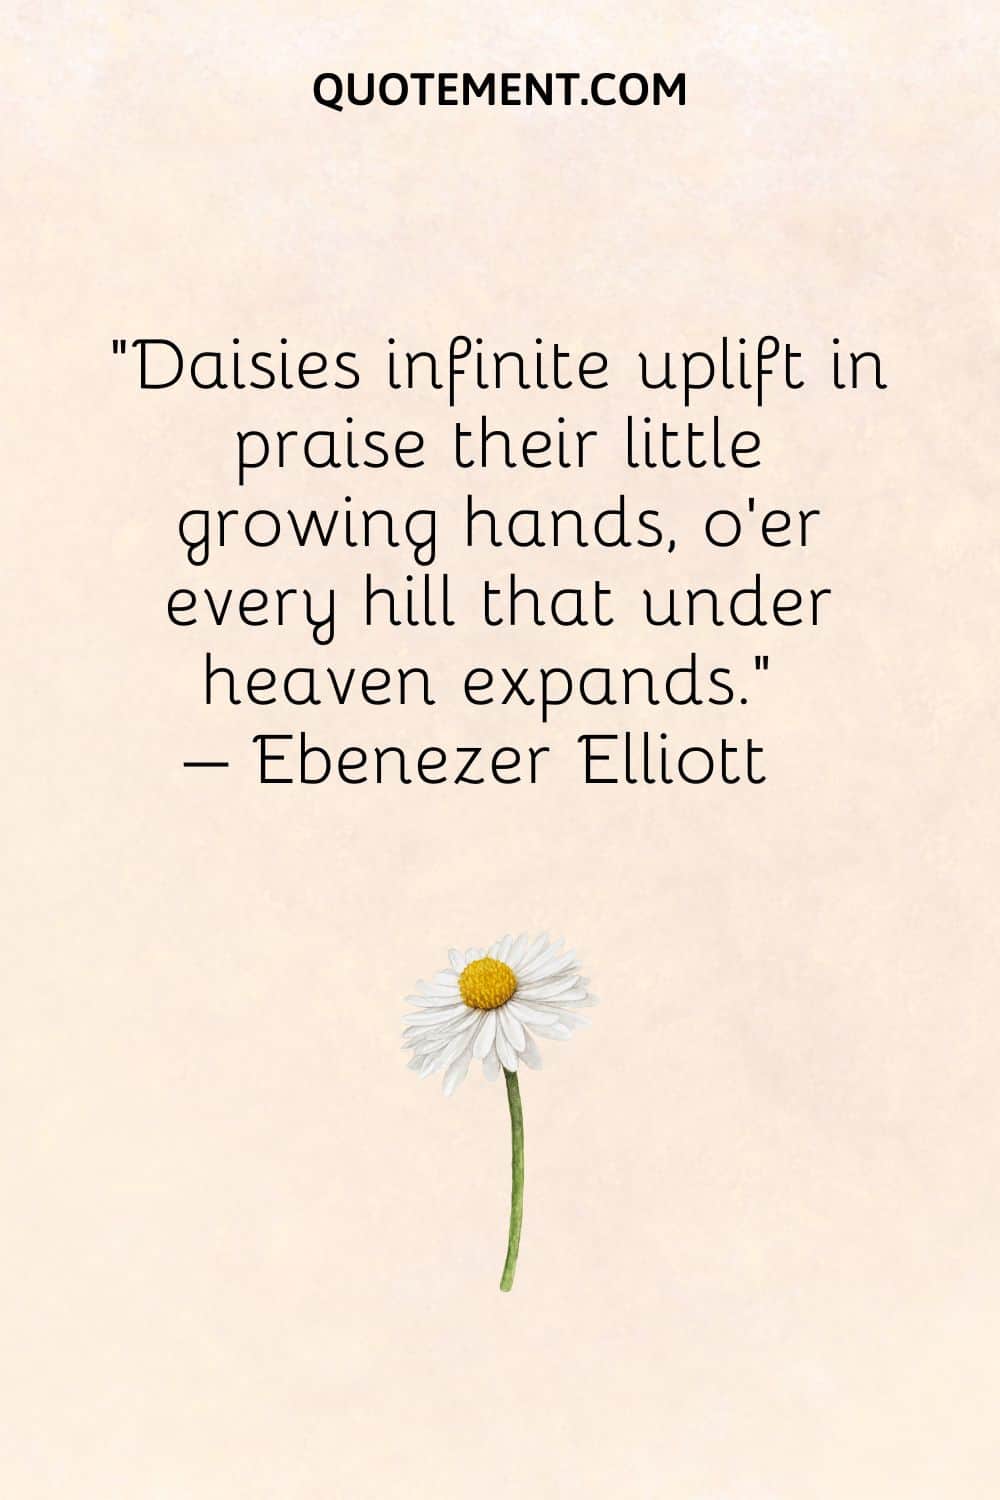 Daisies infinite uplift in praise their little growing hands, o'er every hill that under heaven expands